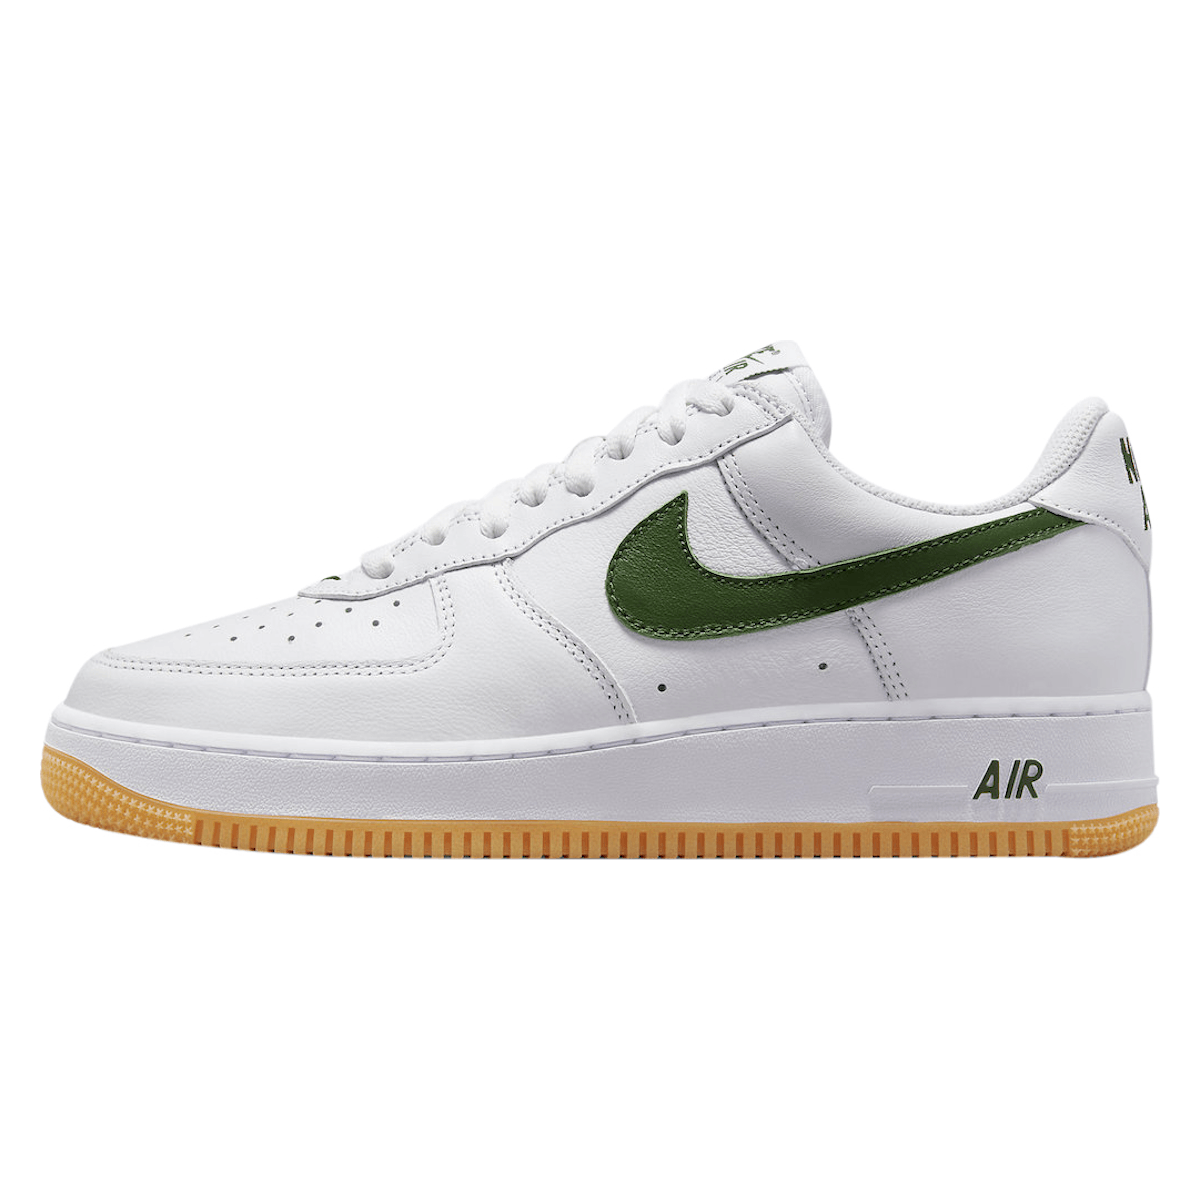 Nike Air Force 1 Low Retro QS "Forest Green"